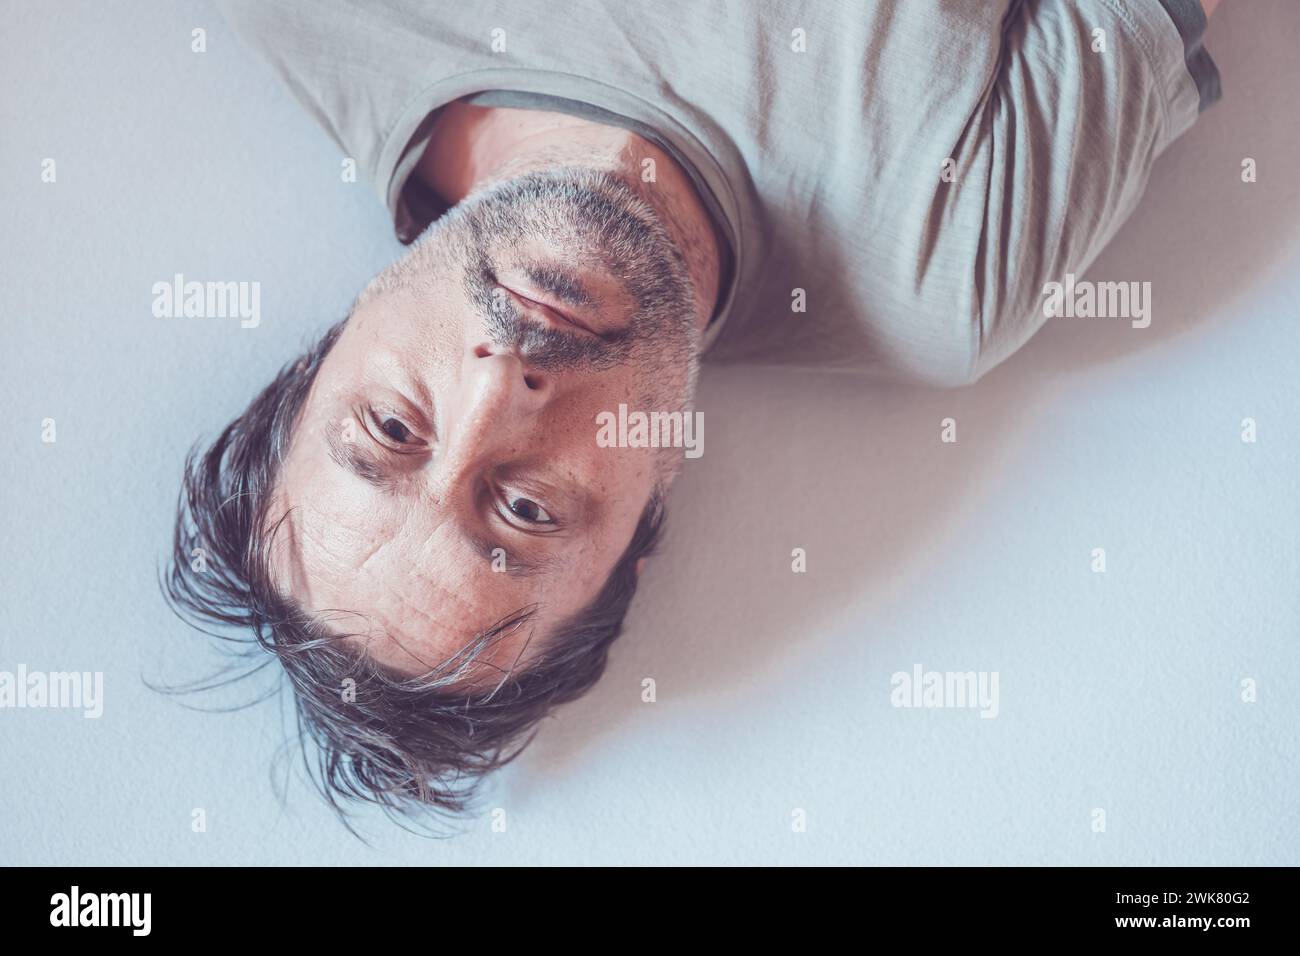 Top view high key portrait of depressed man lying in bed and looking up at the camera Stock Photo